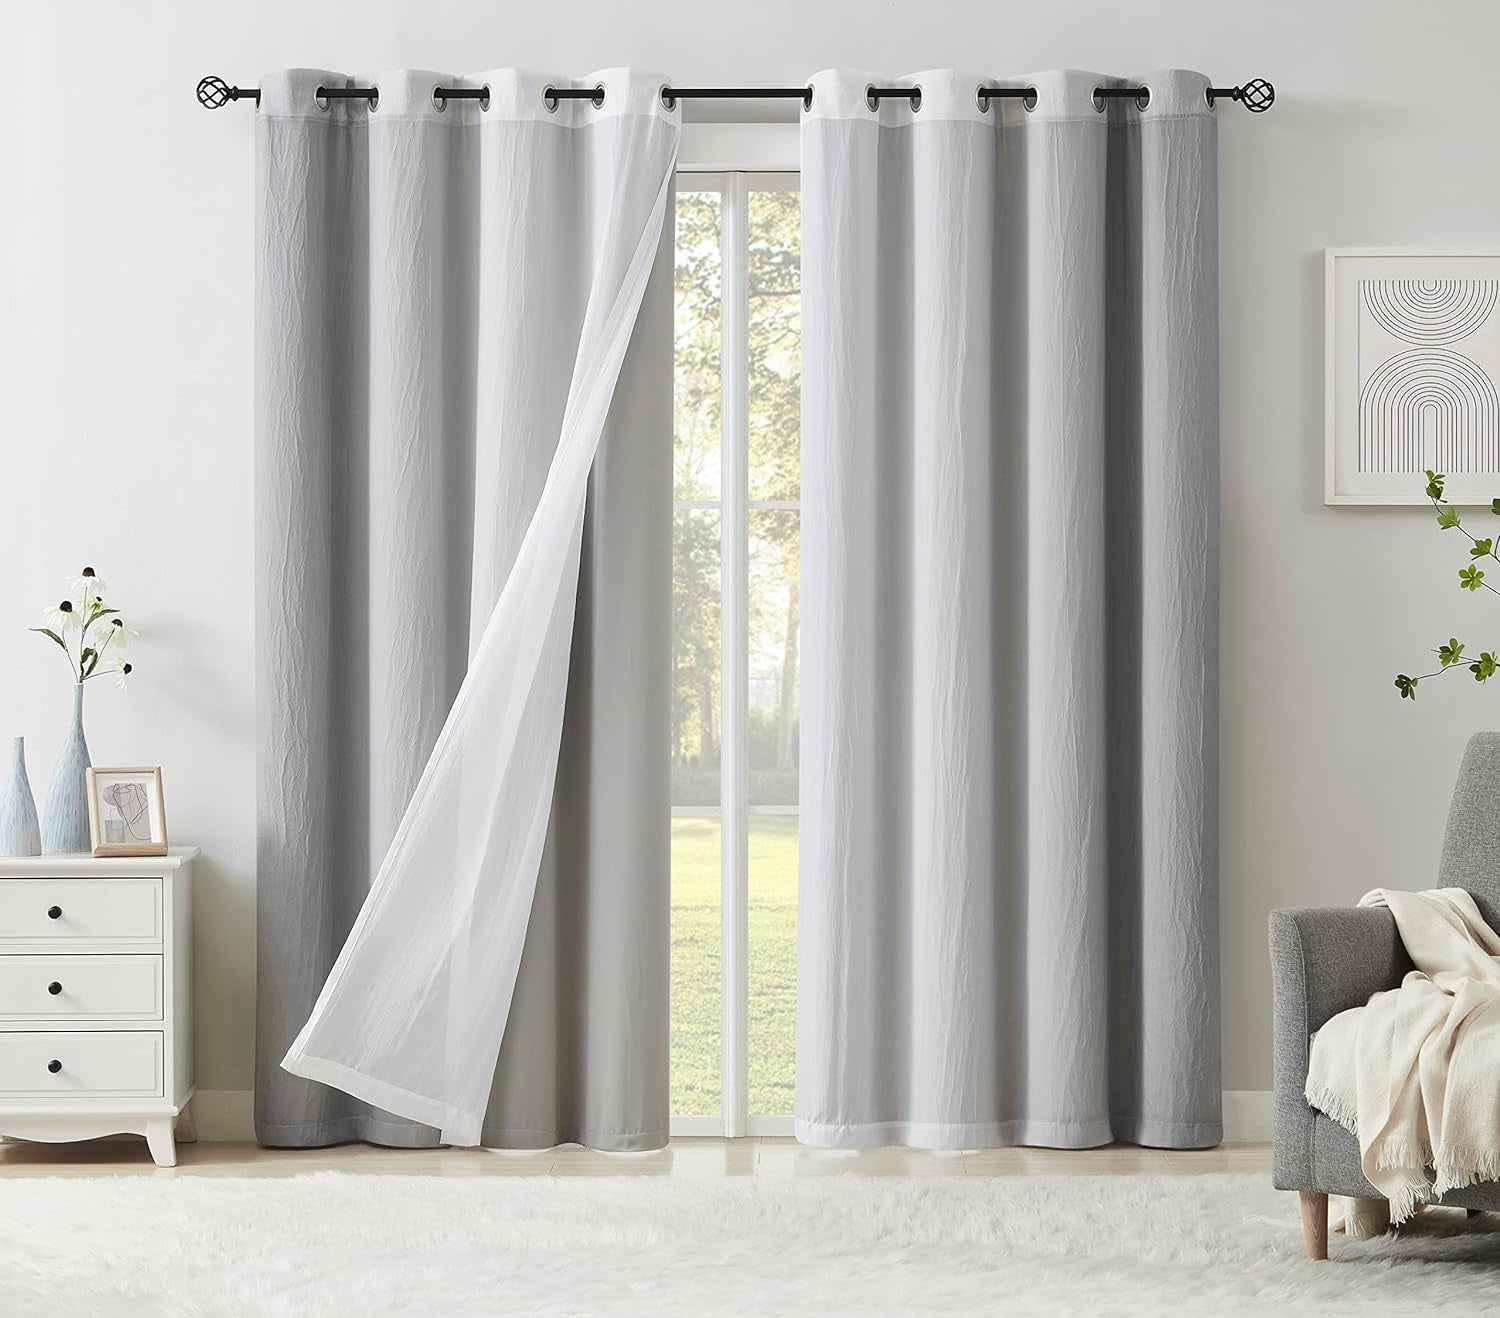 Mix and Match Blackout Curtains - Bedroom Solid Black Full Blackout Window Panels & Black Chiffon Sheer Curtains Thermal Insulated Drapes for Living Room, Grommet, 52" W X 63" L, Set of 4  Purainbow Grey 52" X 63" 